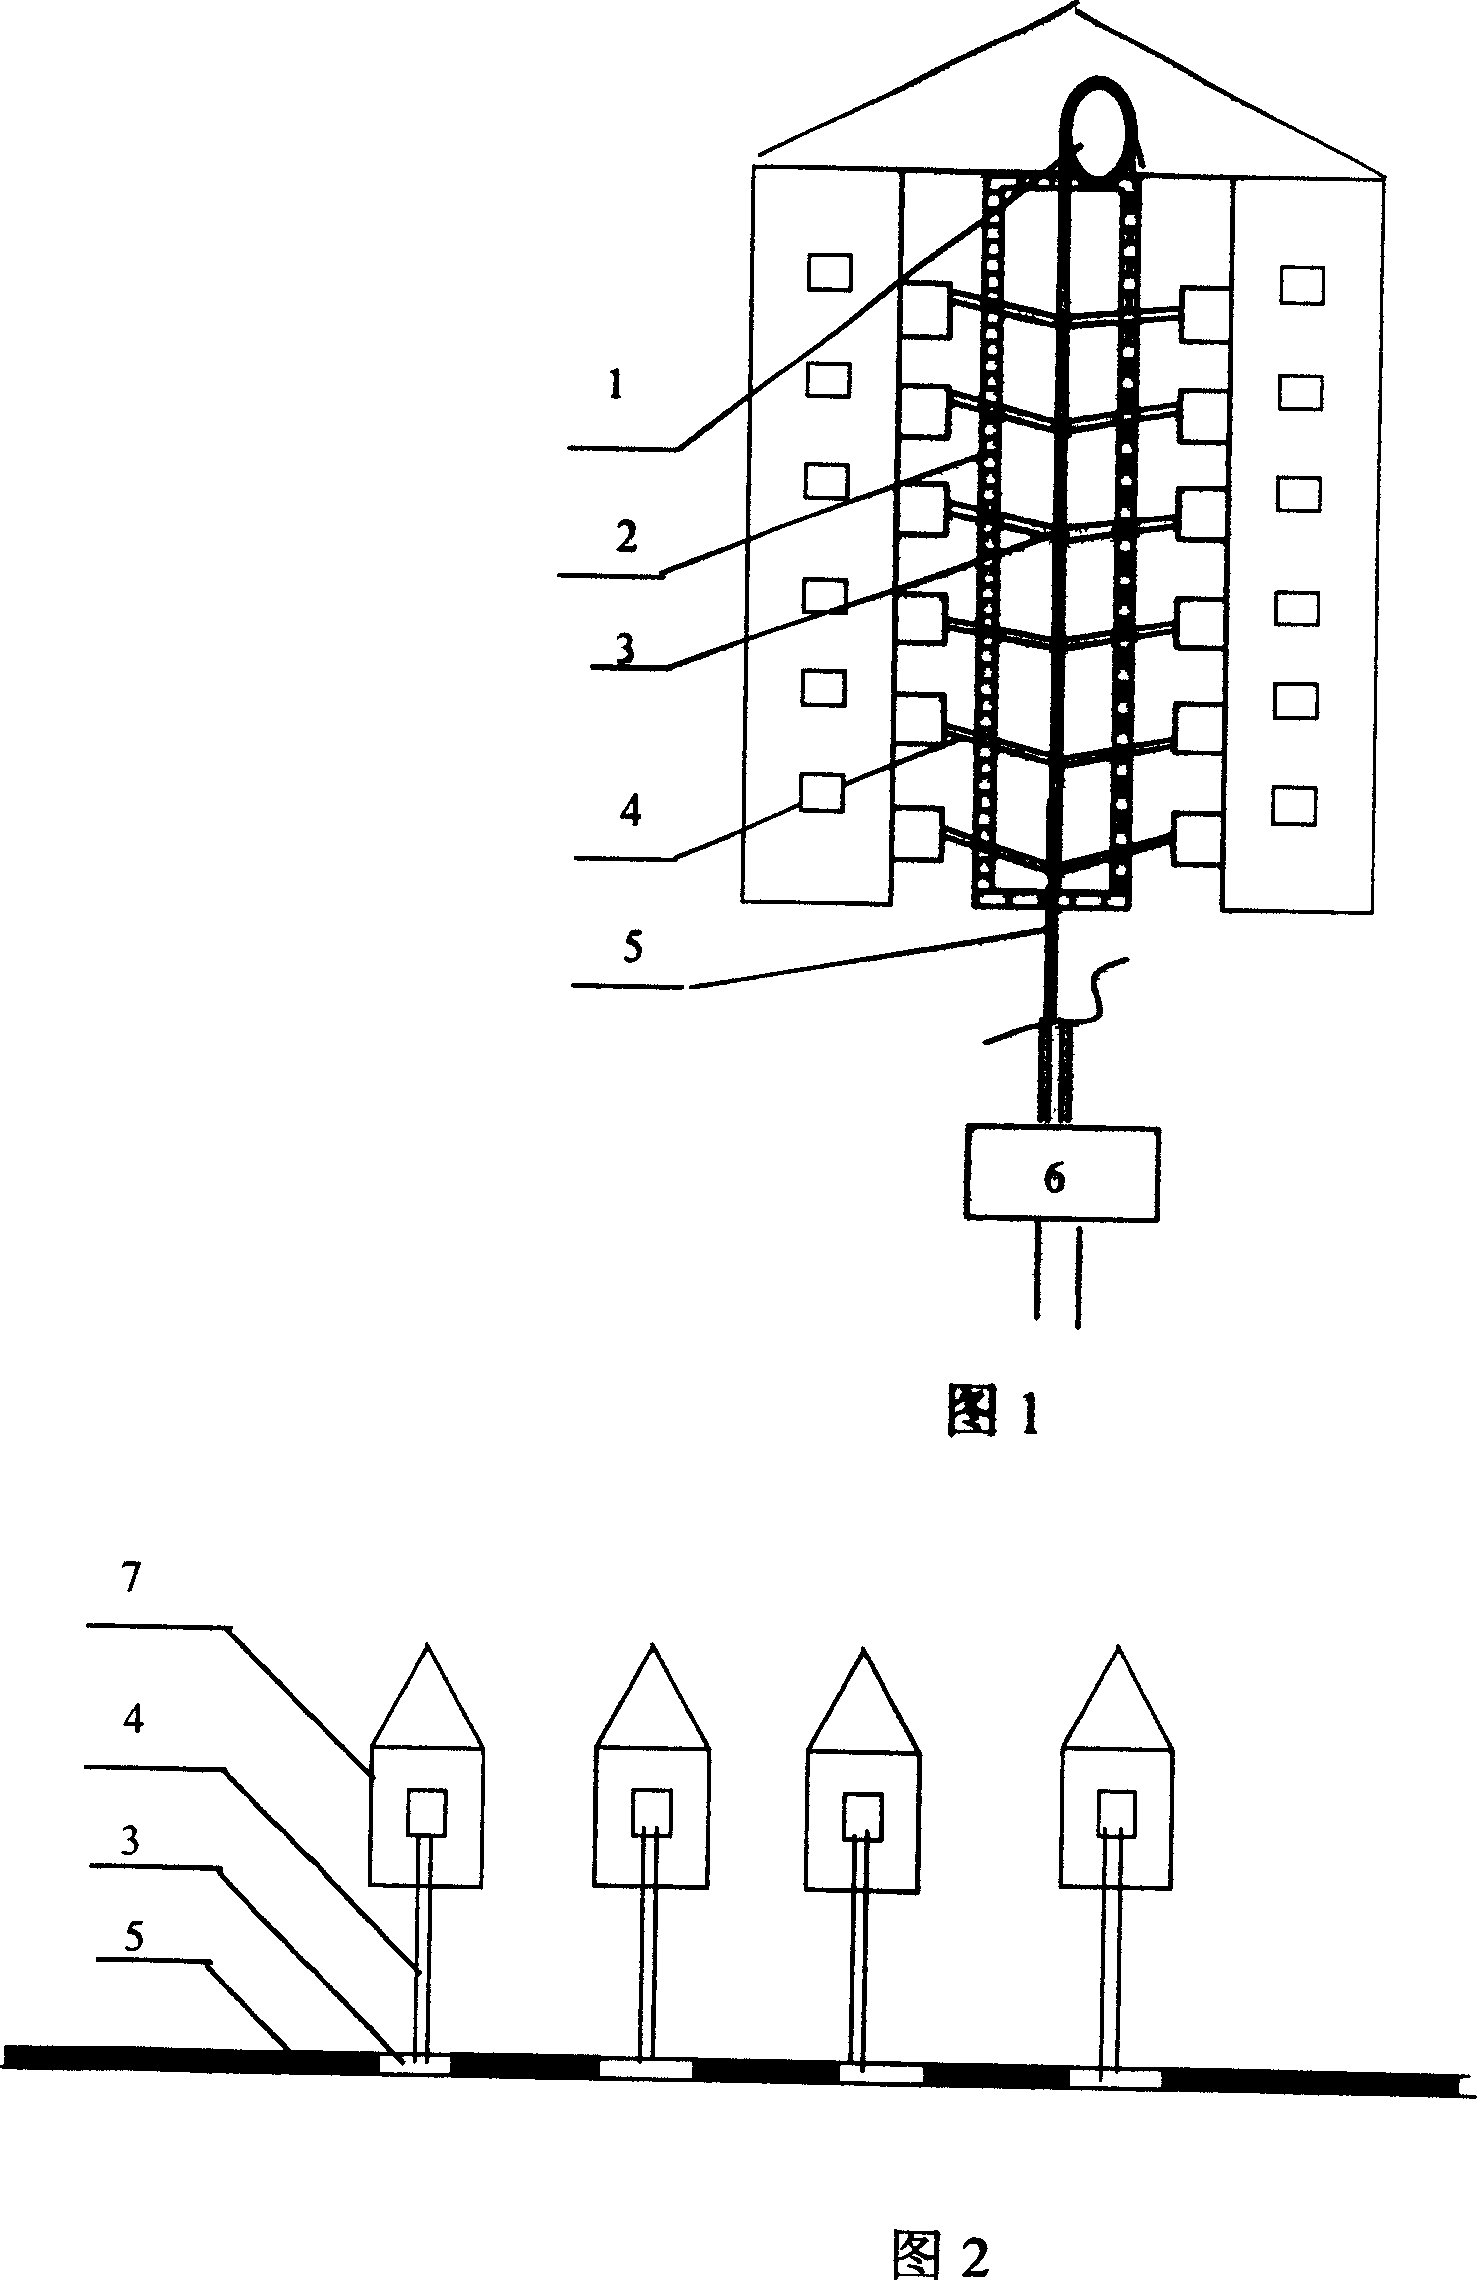 Optical cable laying and fiber distributing method for optical fiber to house